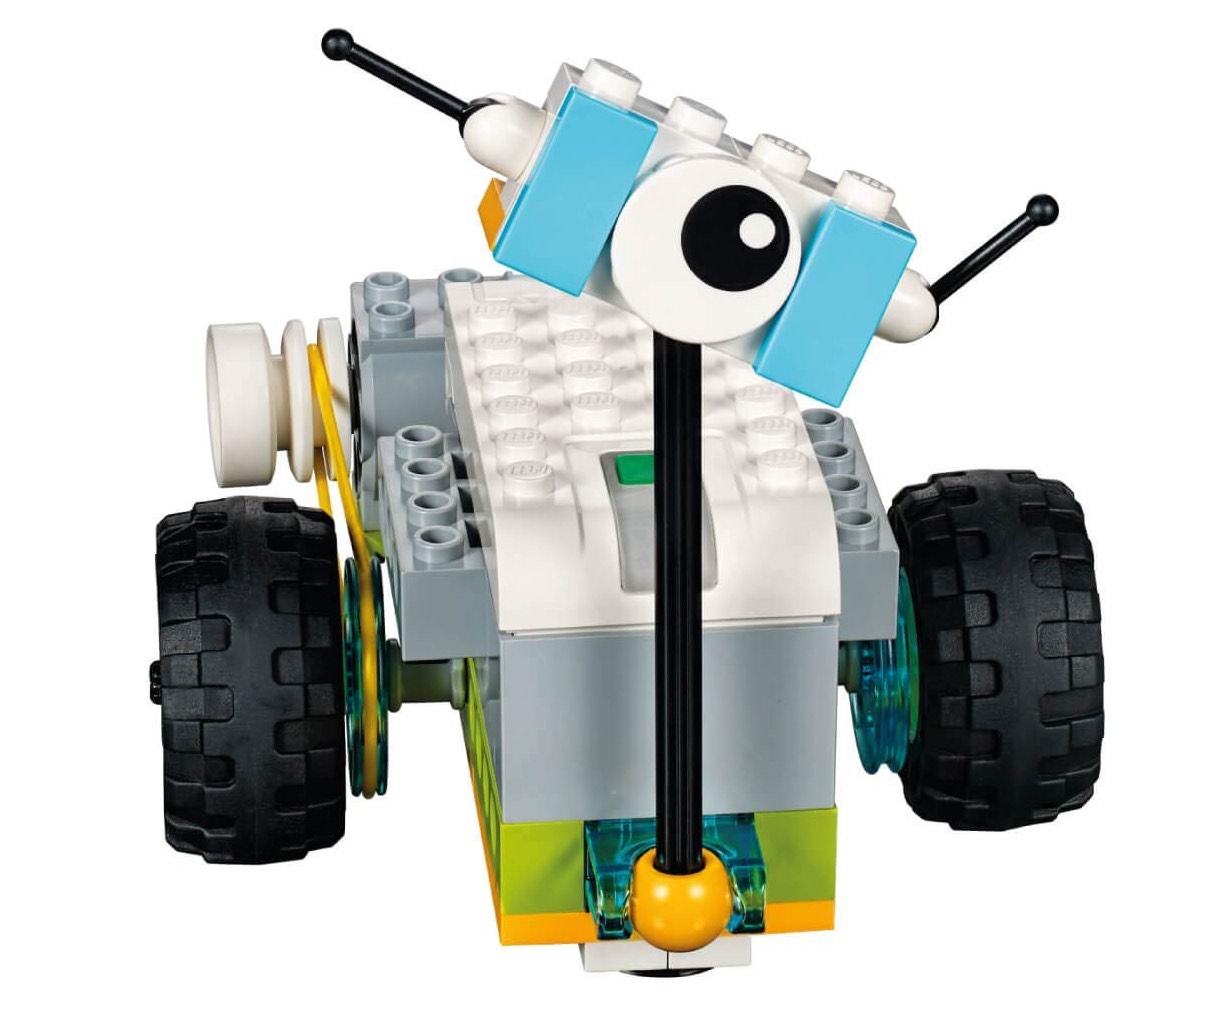 kids educational toys to get from abroad - Lego Wedo education set